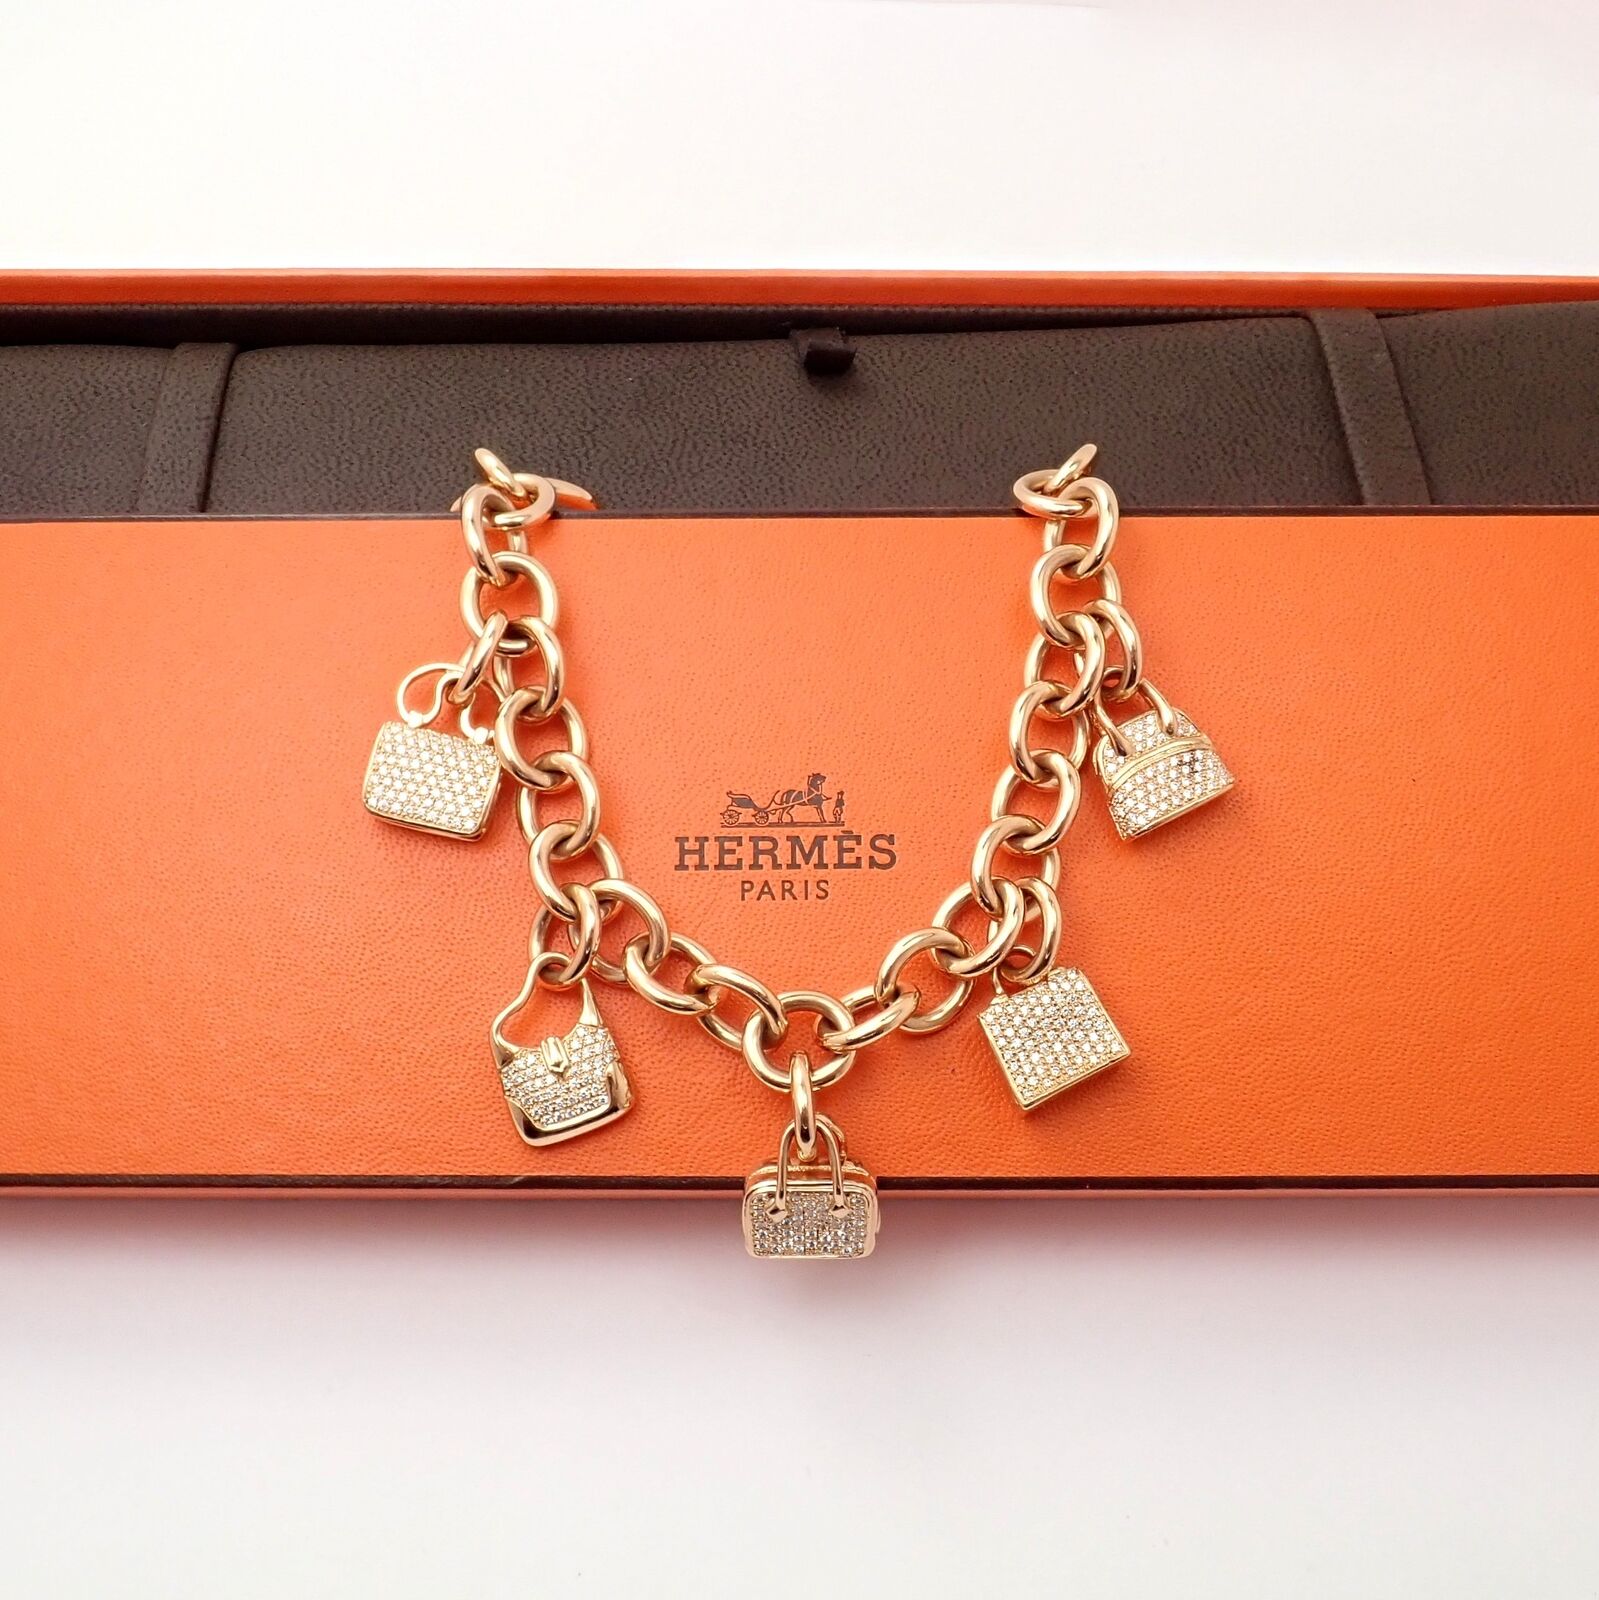 Hermes Jewelry & Watches:Fine Jewelry:Bracelets & Charms Authentic! Hermes 18k Rose Gold Diamond Signature Iconic Bag Charm Link Bracelet